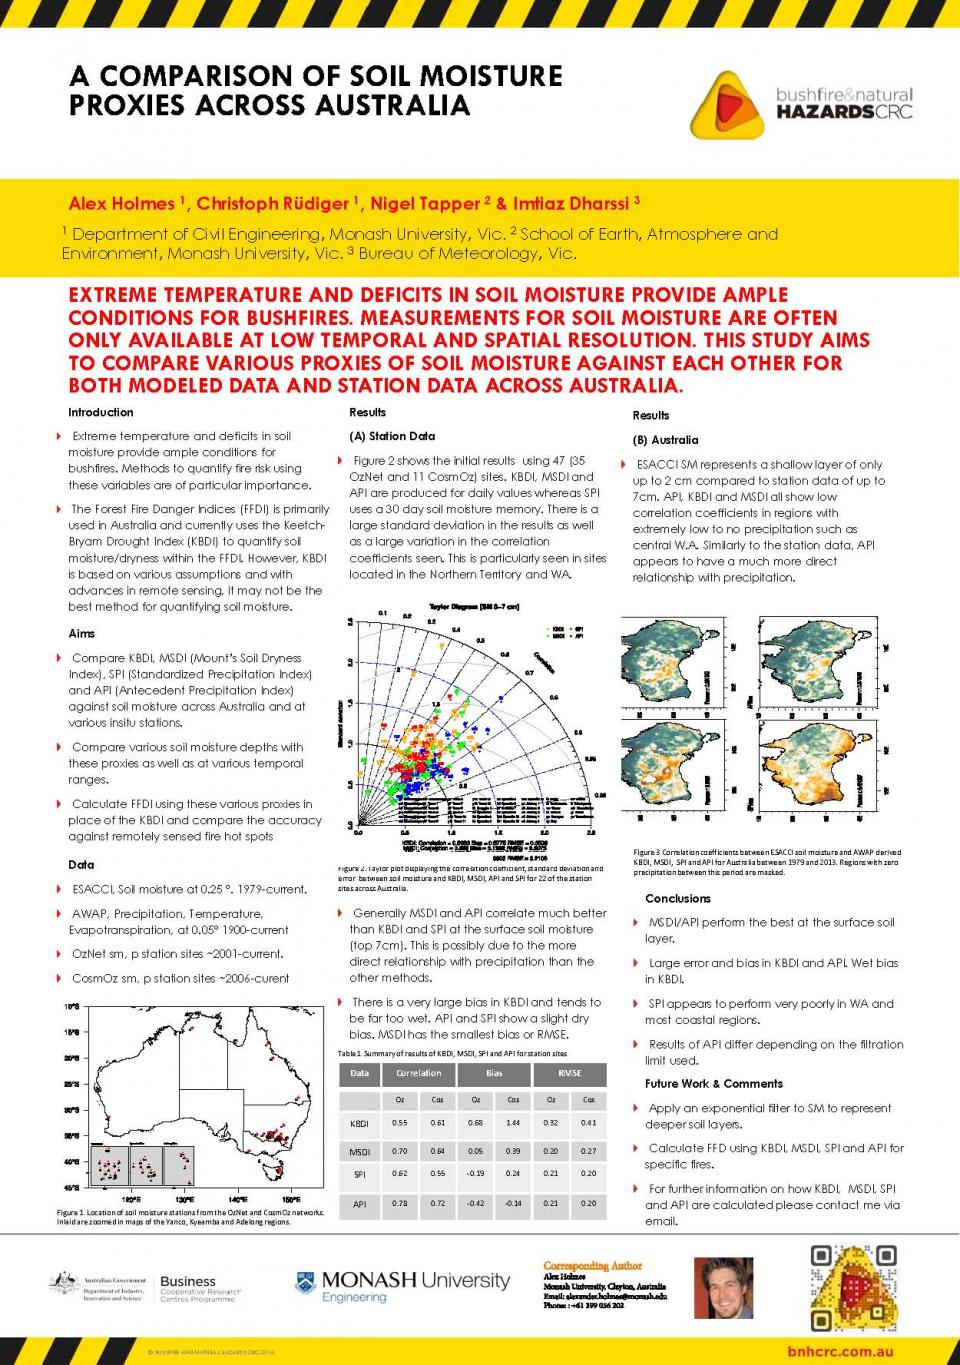 Alex Holmes Conference Poster 2016